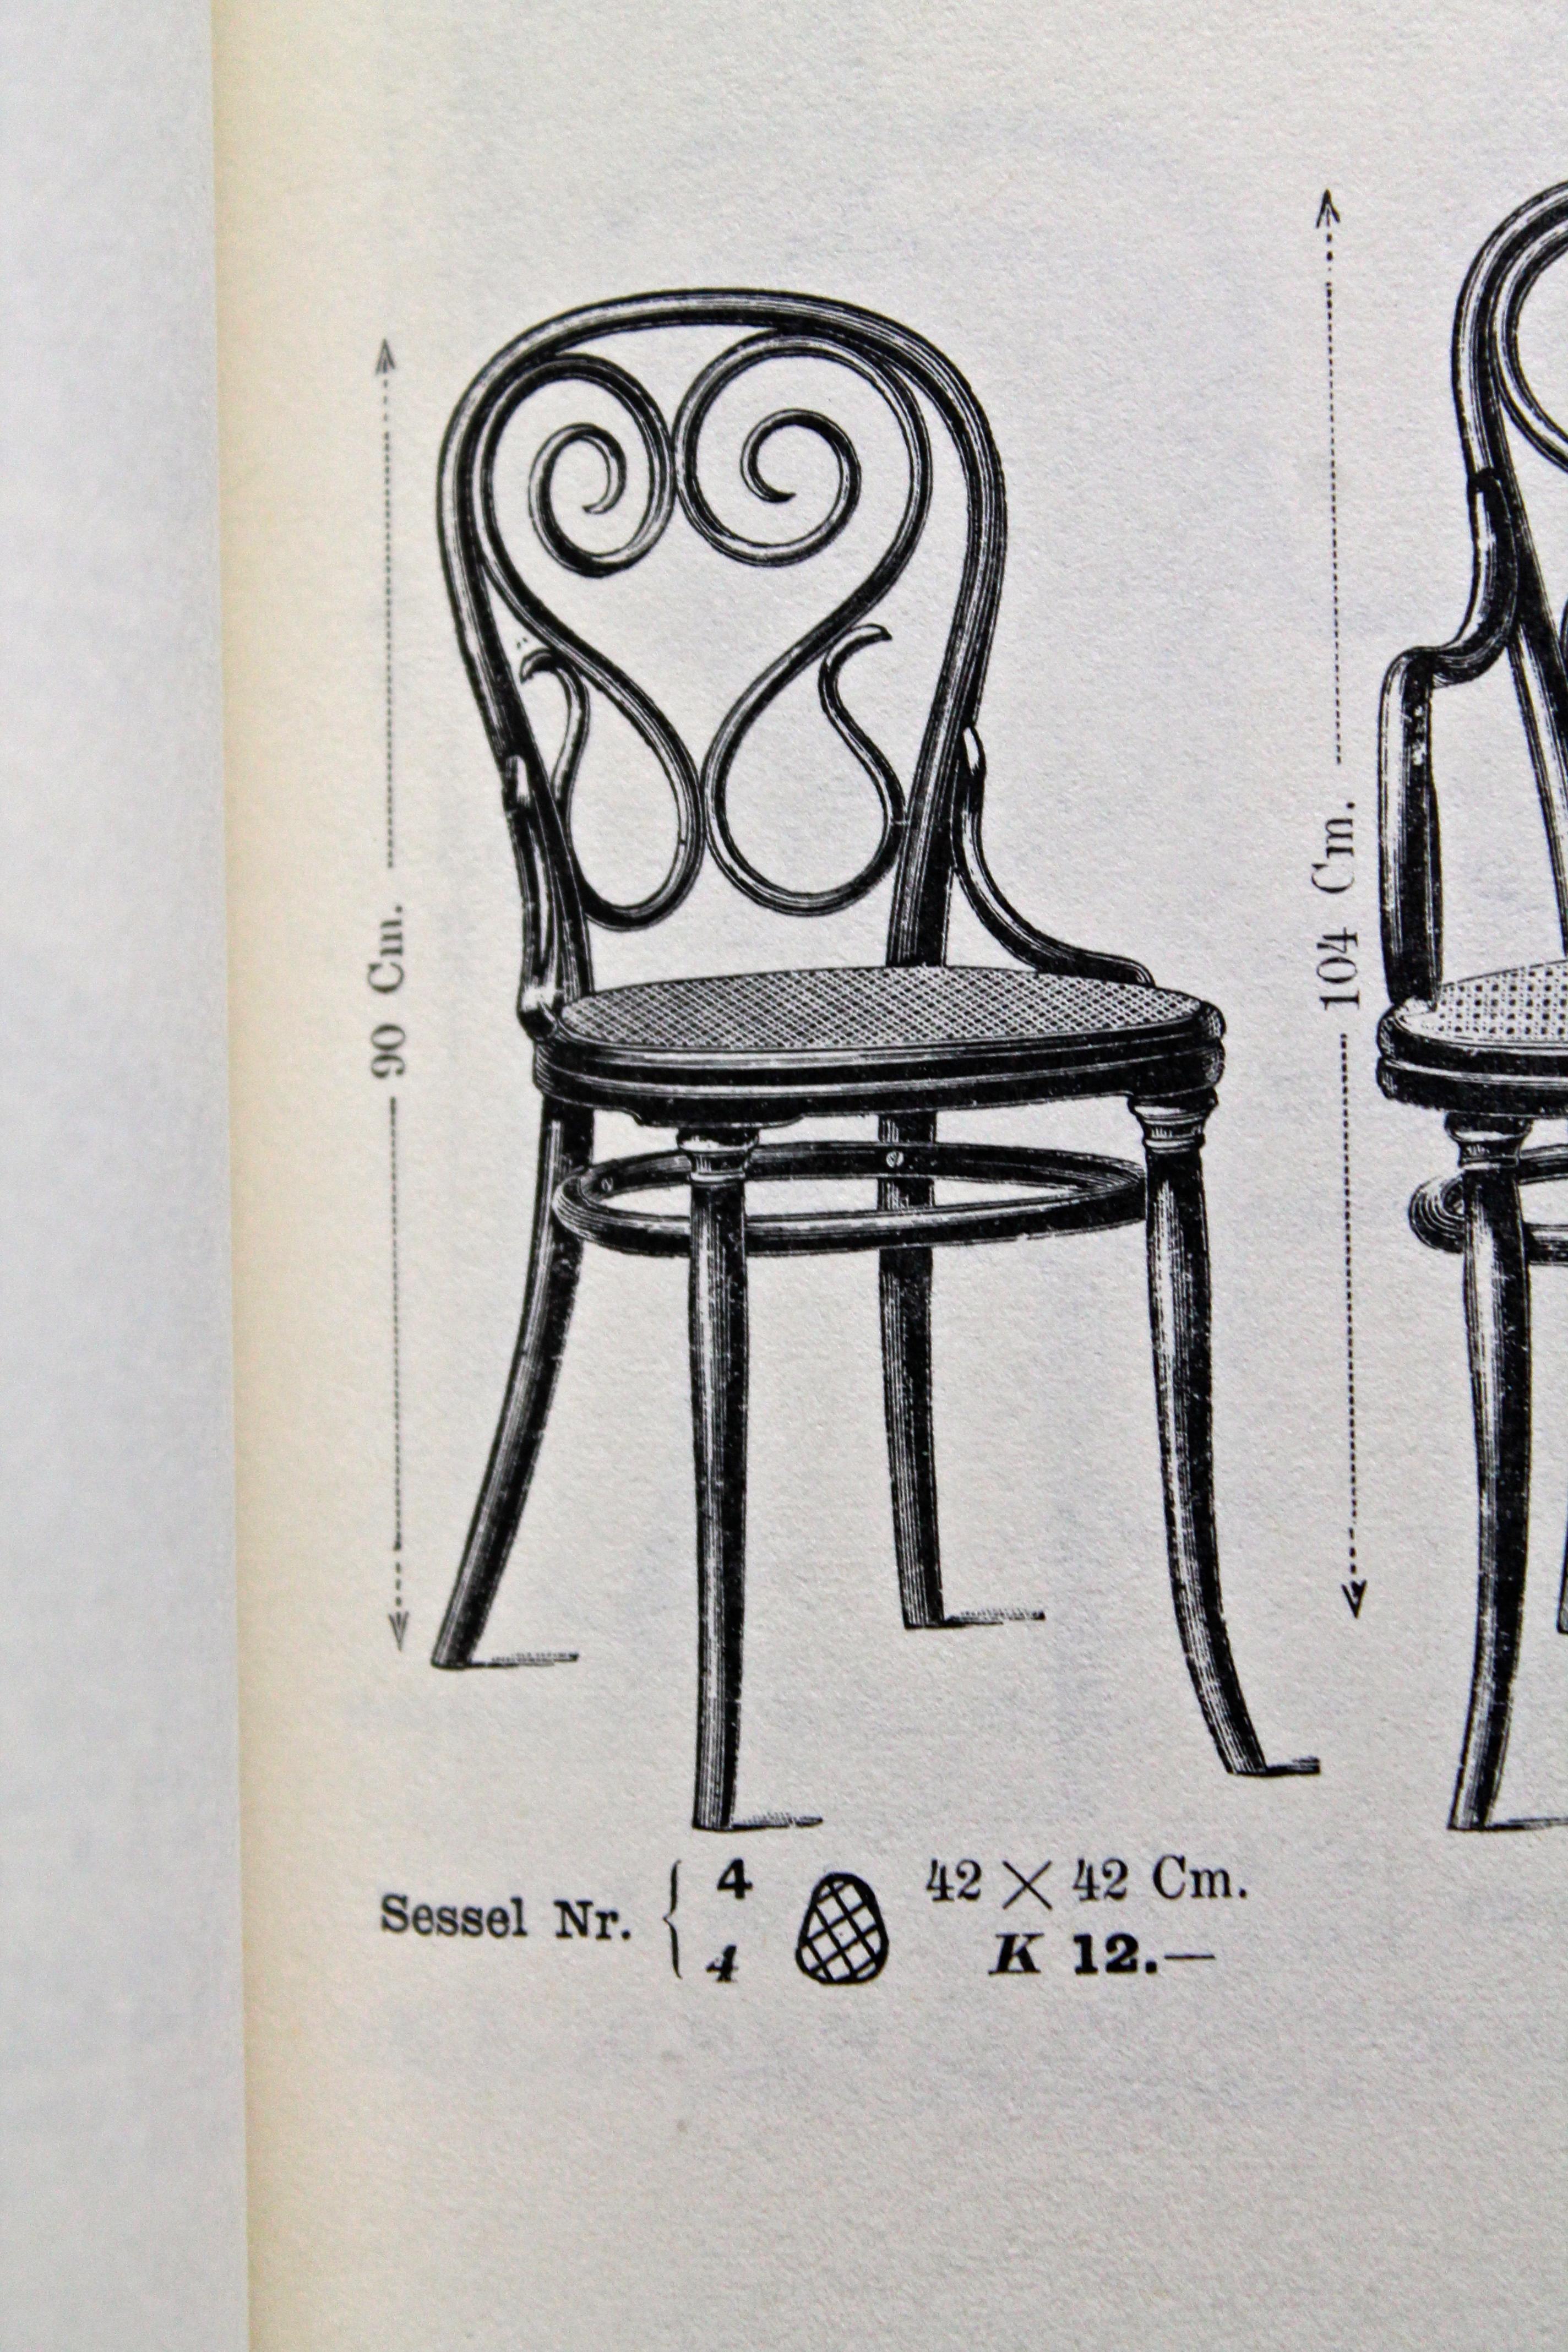 Originally designed by Thonet for the Cafe Daum, Vienna in 1849. And subsequently manufactured as the #4 Chair. This is the original version with the original legs, as shown on the cover of the catalog reprint.